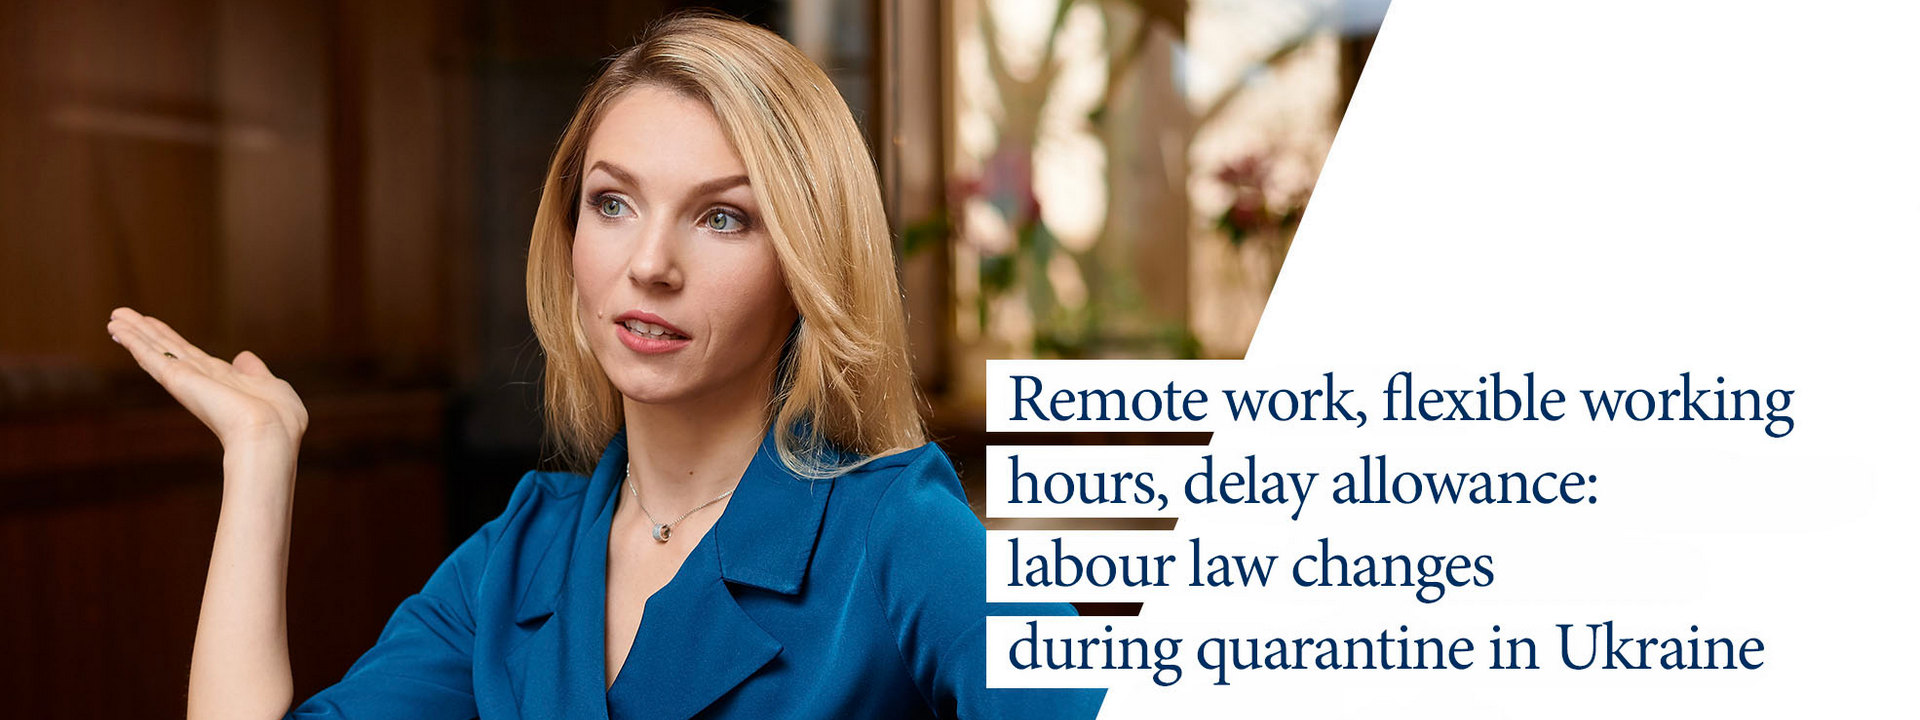 Remote Work, Flexible Working Hours, Delay Allowance: Labour Law Changes During Quarantine in Ukraine